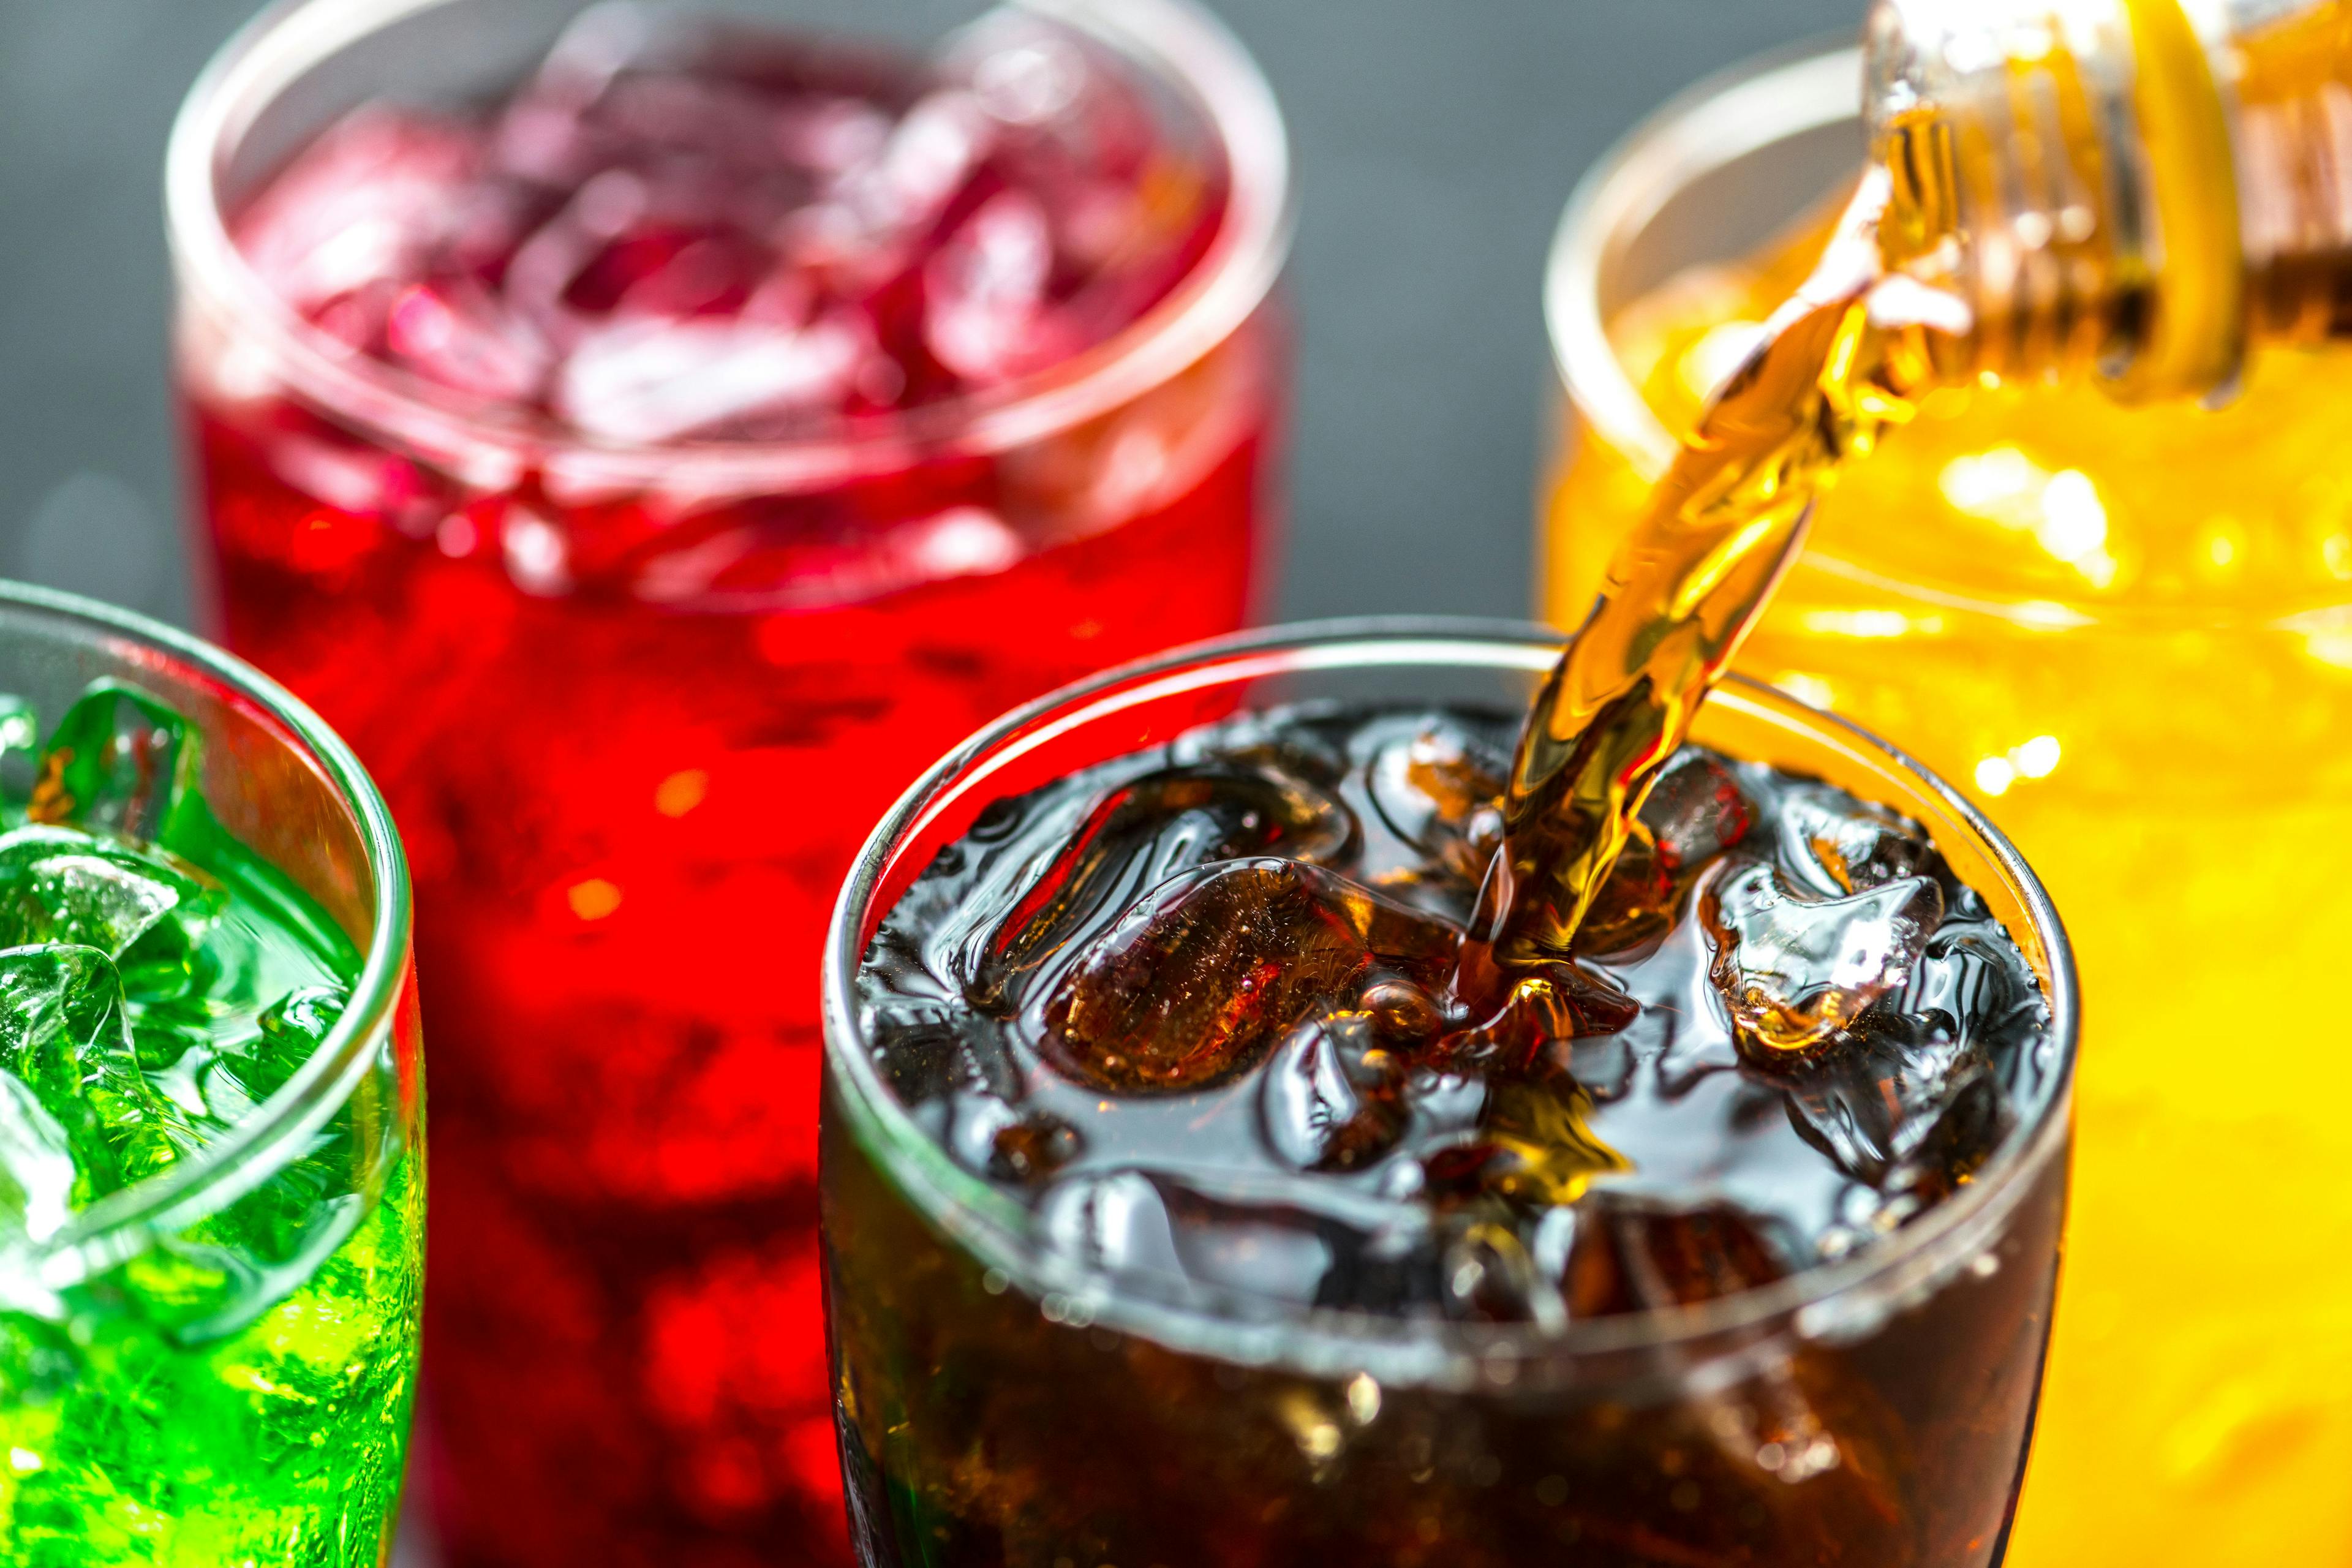 Fruit, vegetable, and sugary drink consumption in young children